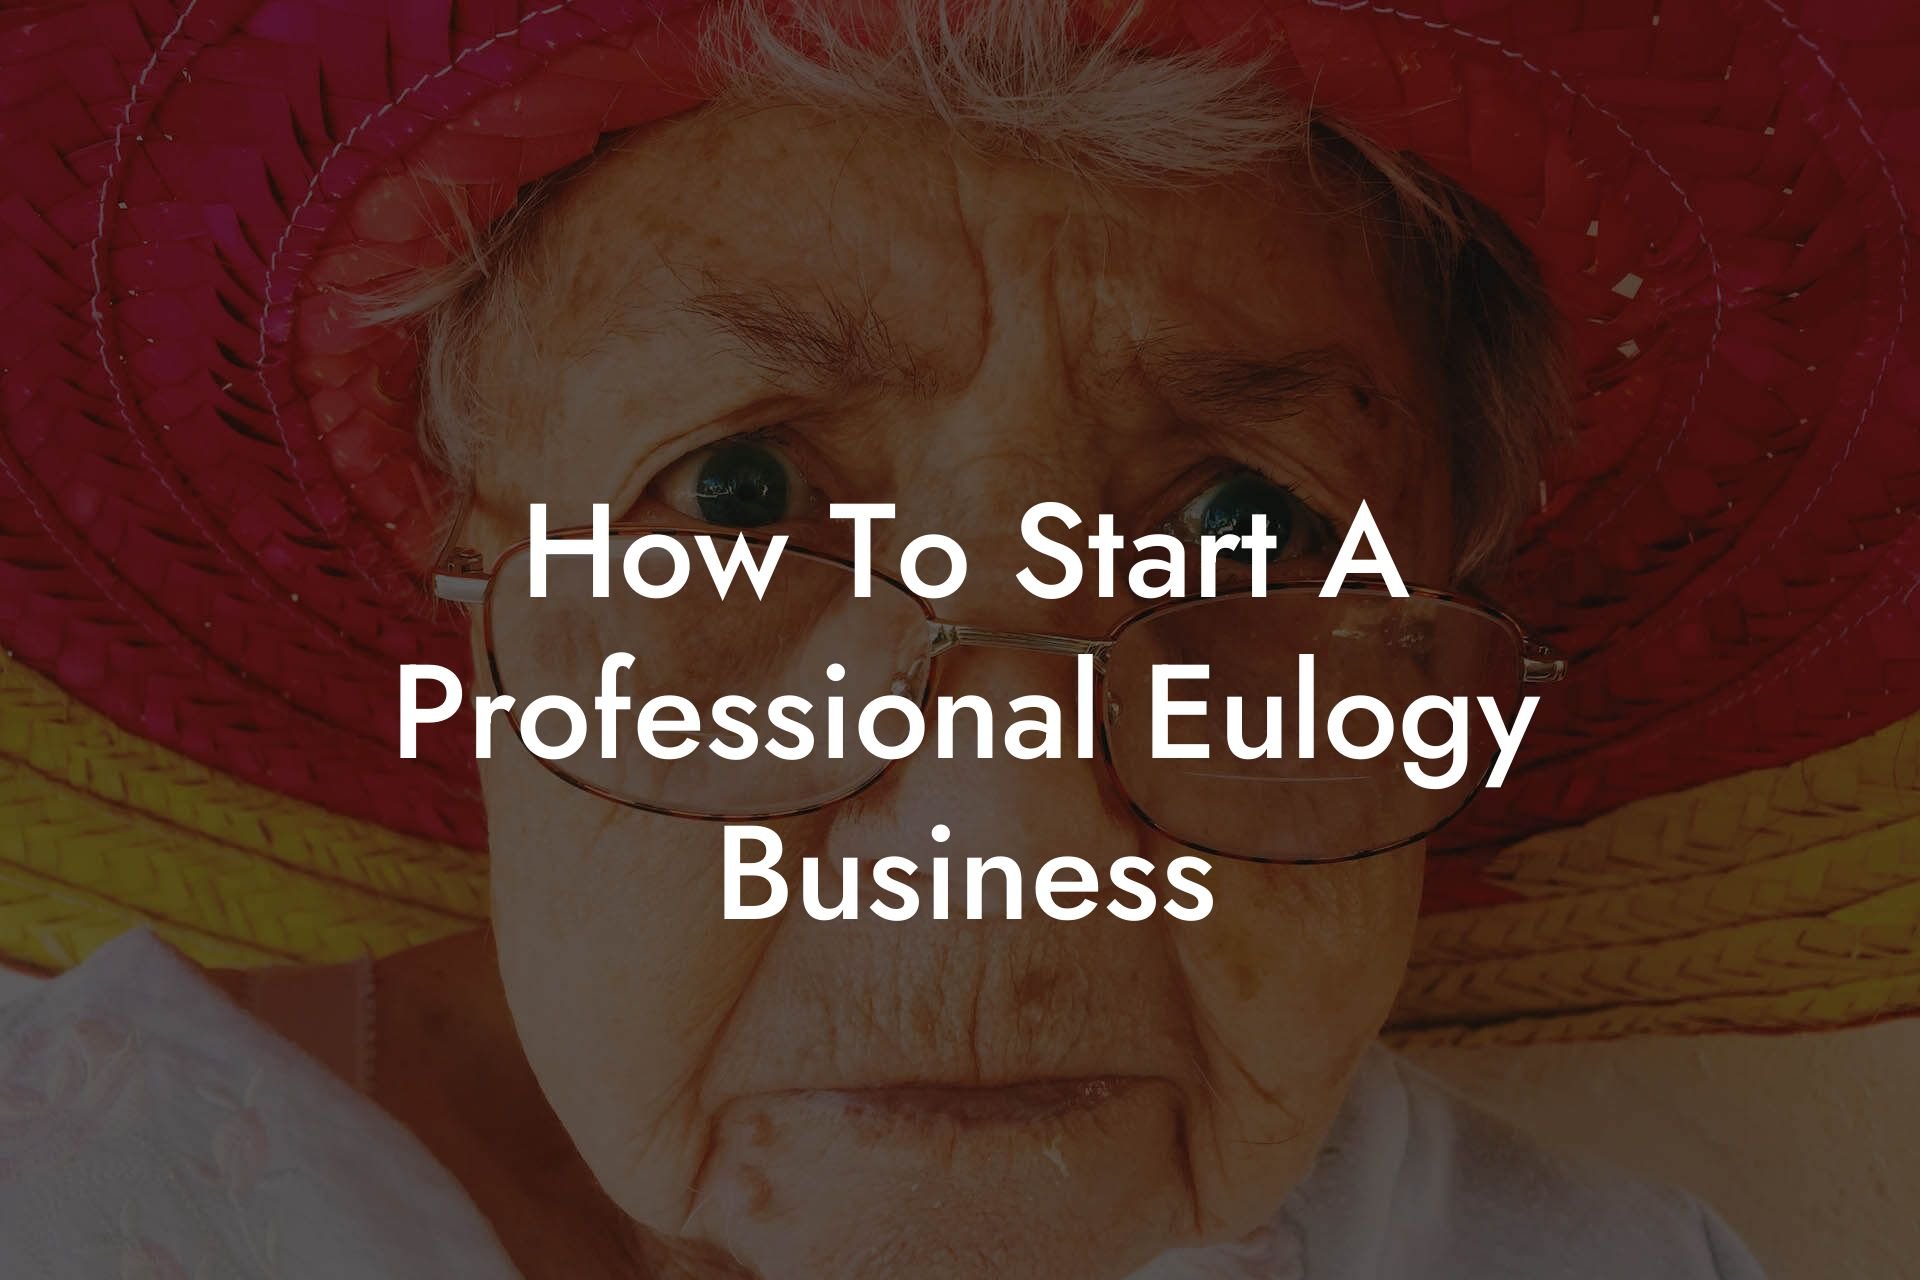 How To Start A Professional Eulogy Business